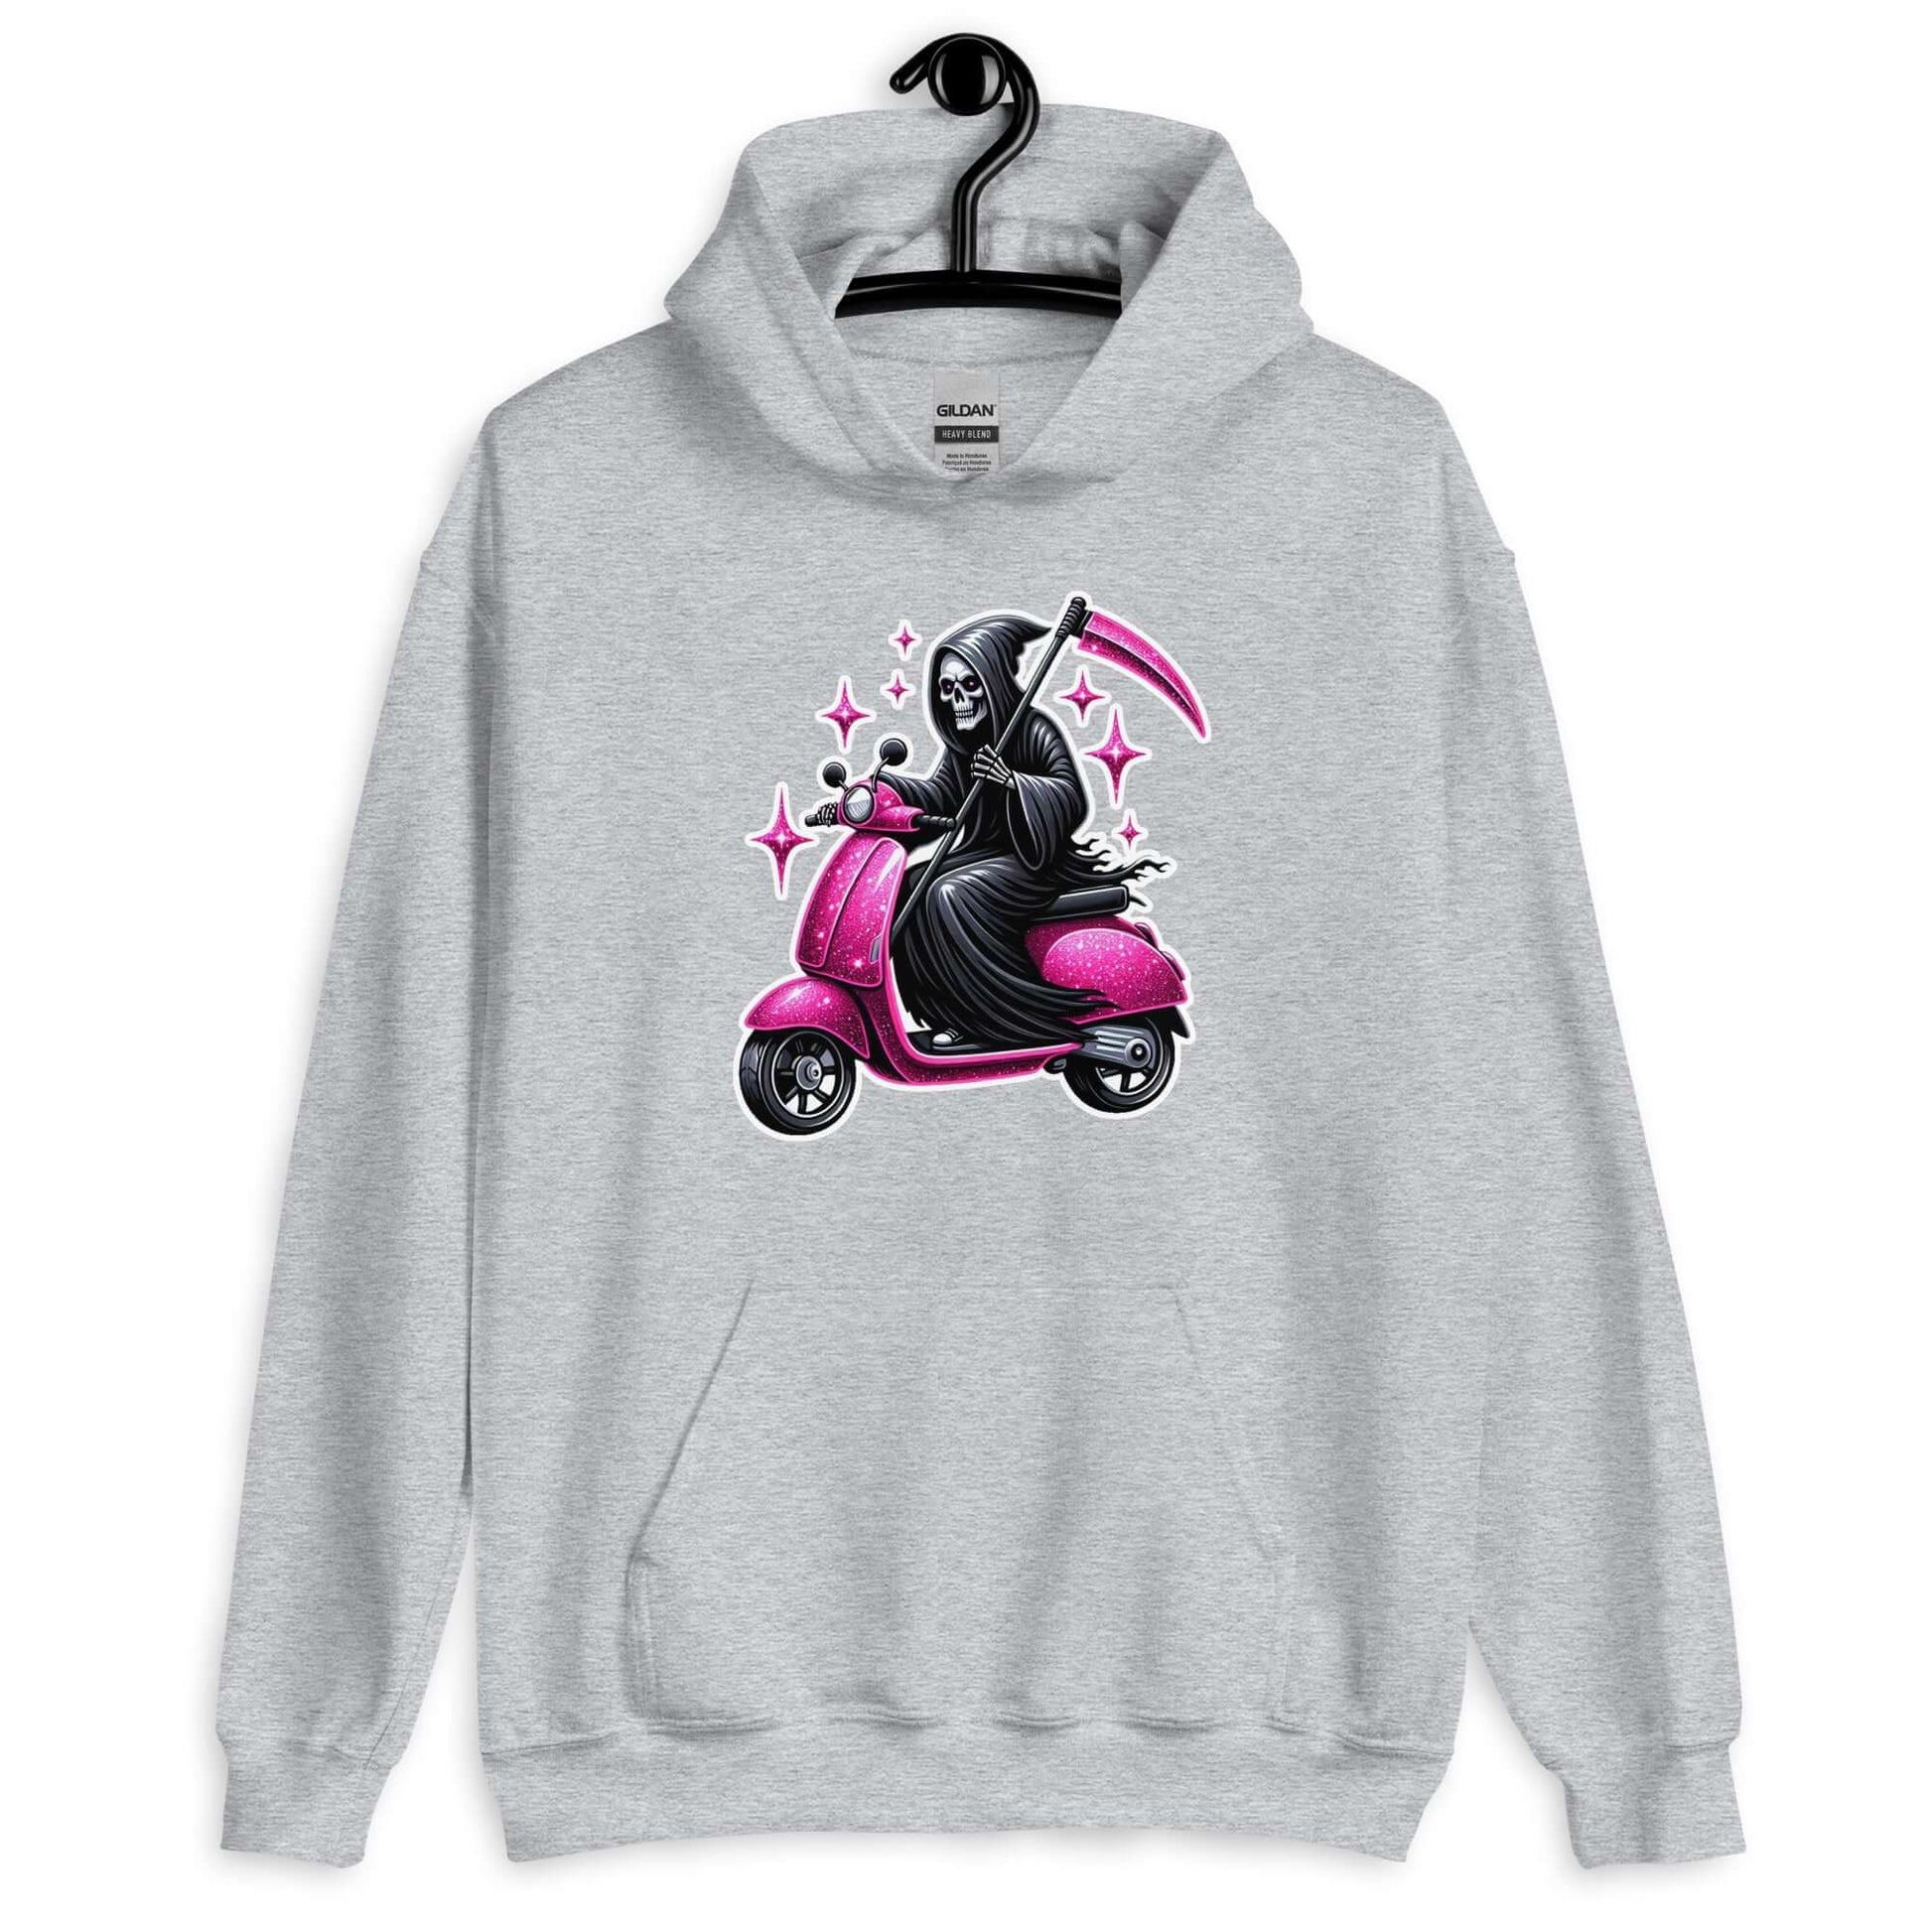 Light grey hoodie sweatshirt with funny image of the Grim Reaper riding on a glam pink scooter printed on the front.